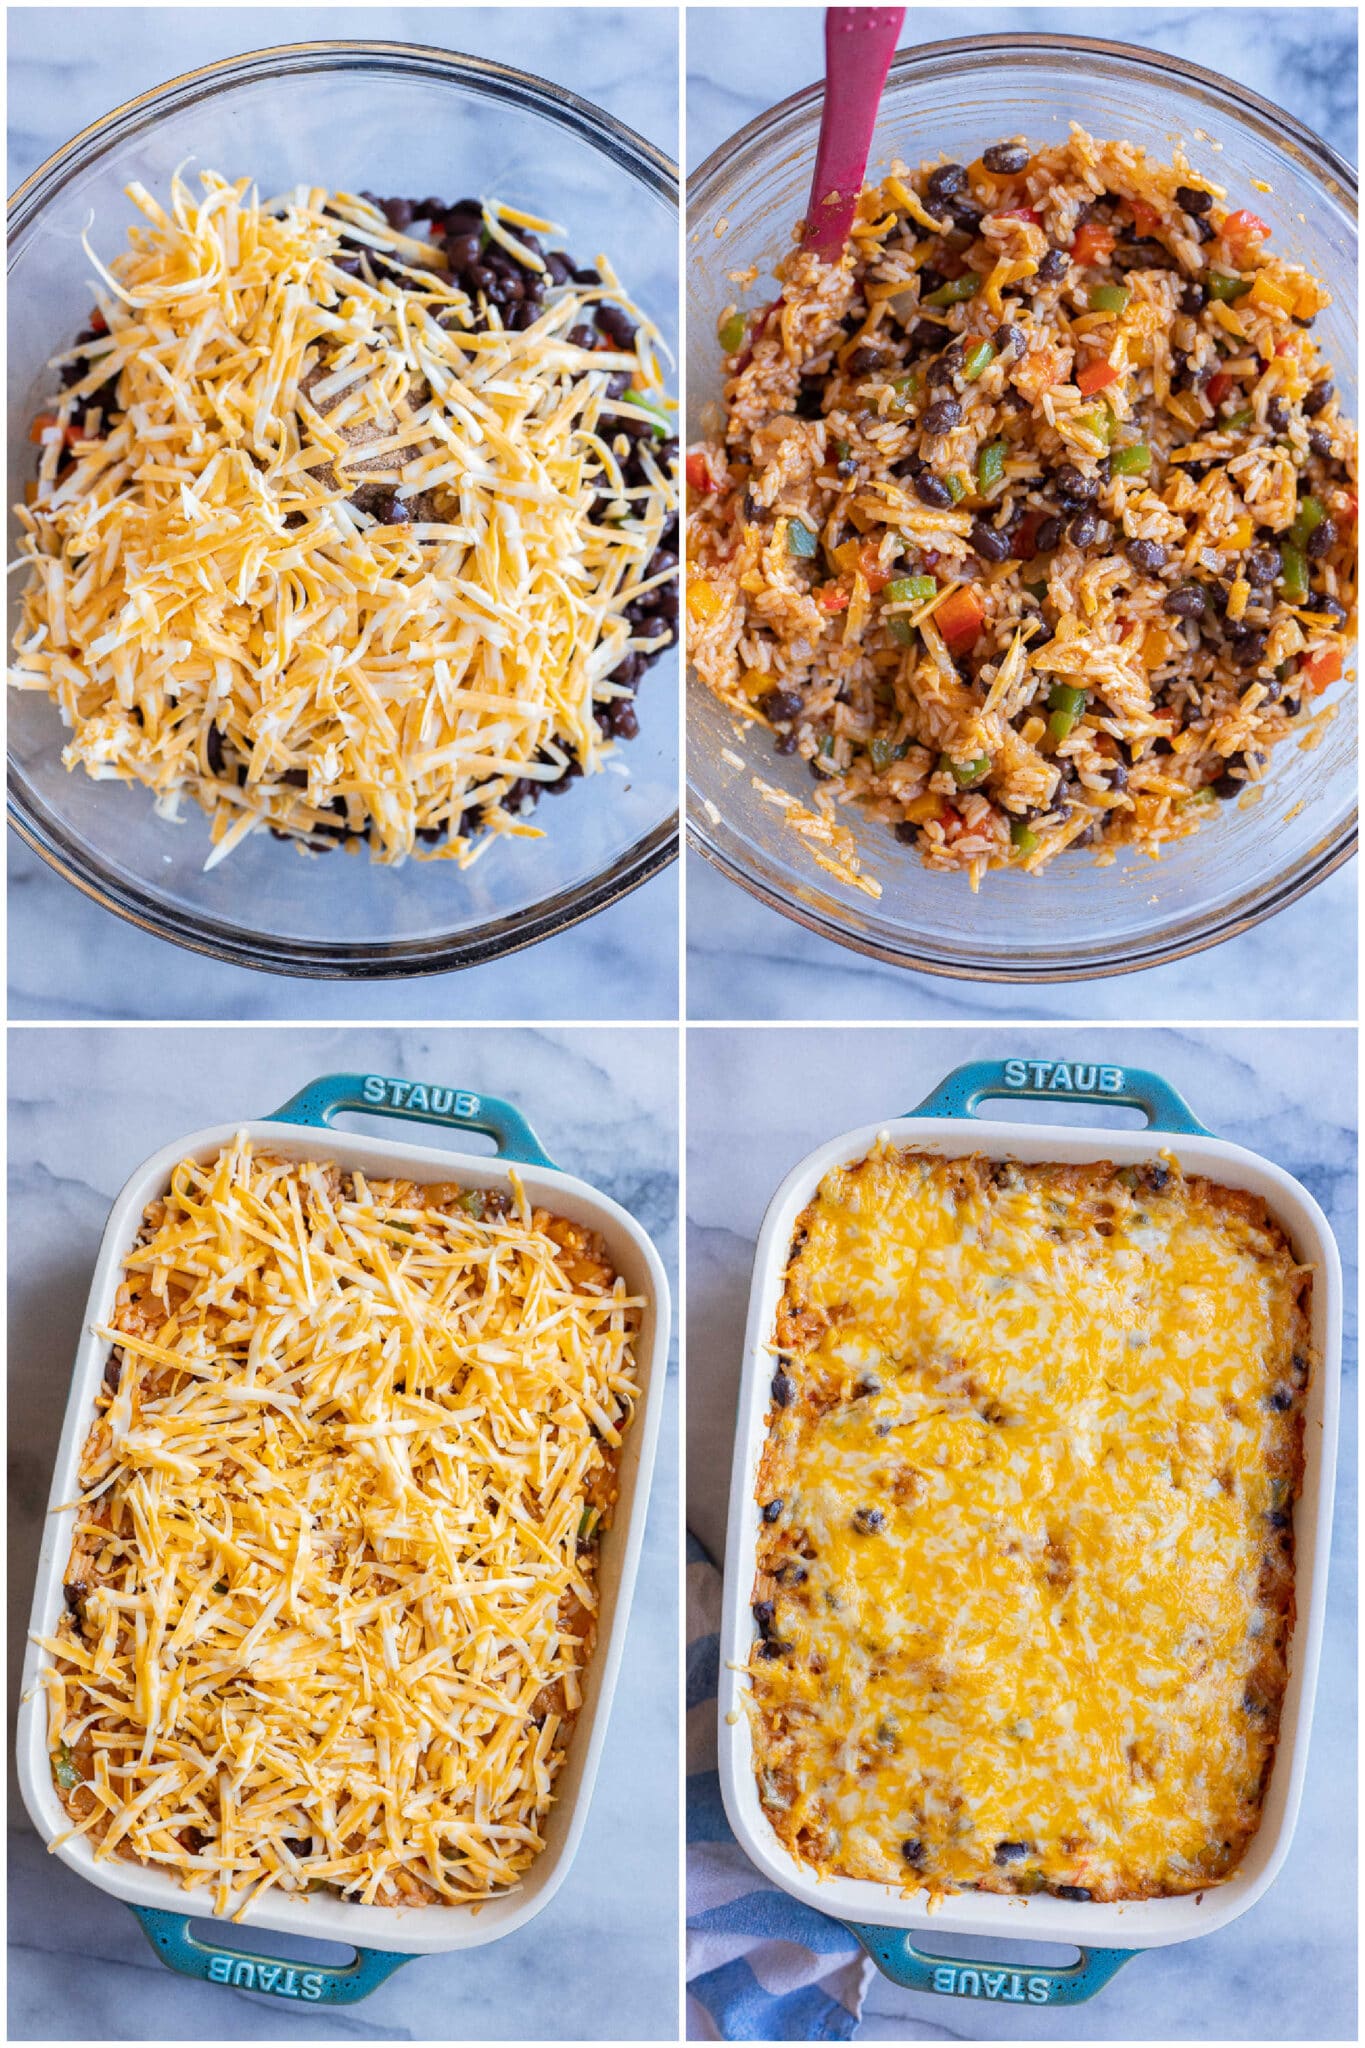 showing how to assemble and bake this vegetarian fajita rice casserole